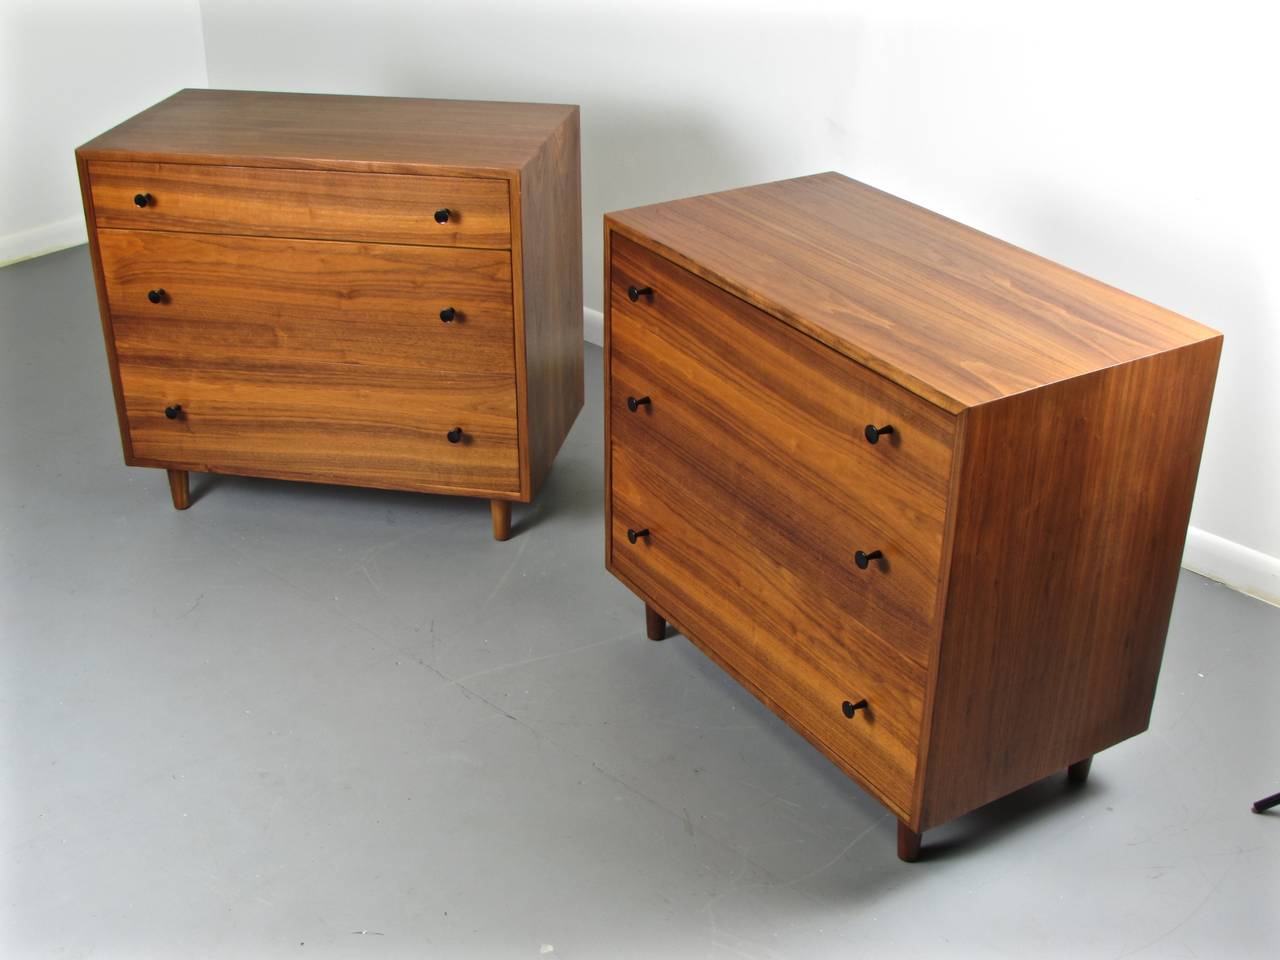 Handsome pair of walnut chests by Milo Baughman for Glenn of California, 1950s. These chests of drawers, with a heavy walnut grain, are nothing short of gorgeous. Finely crafted and of the highest quality. The vintage scale is wonderful for both